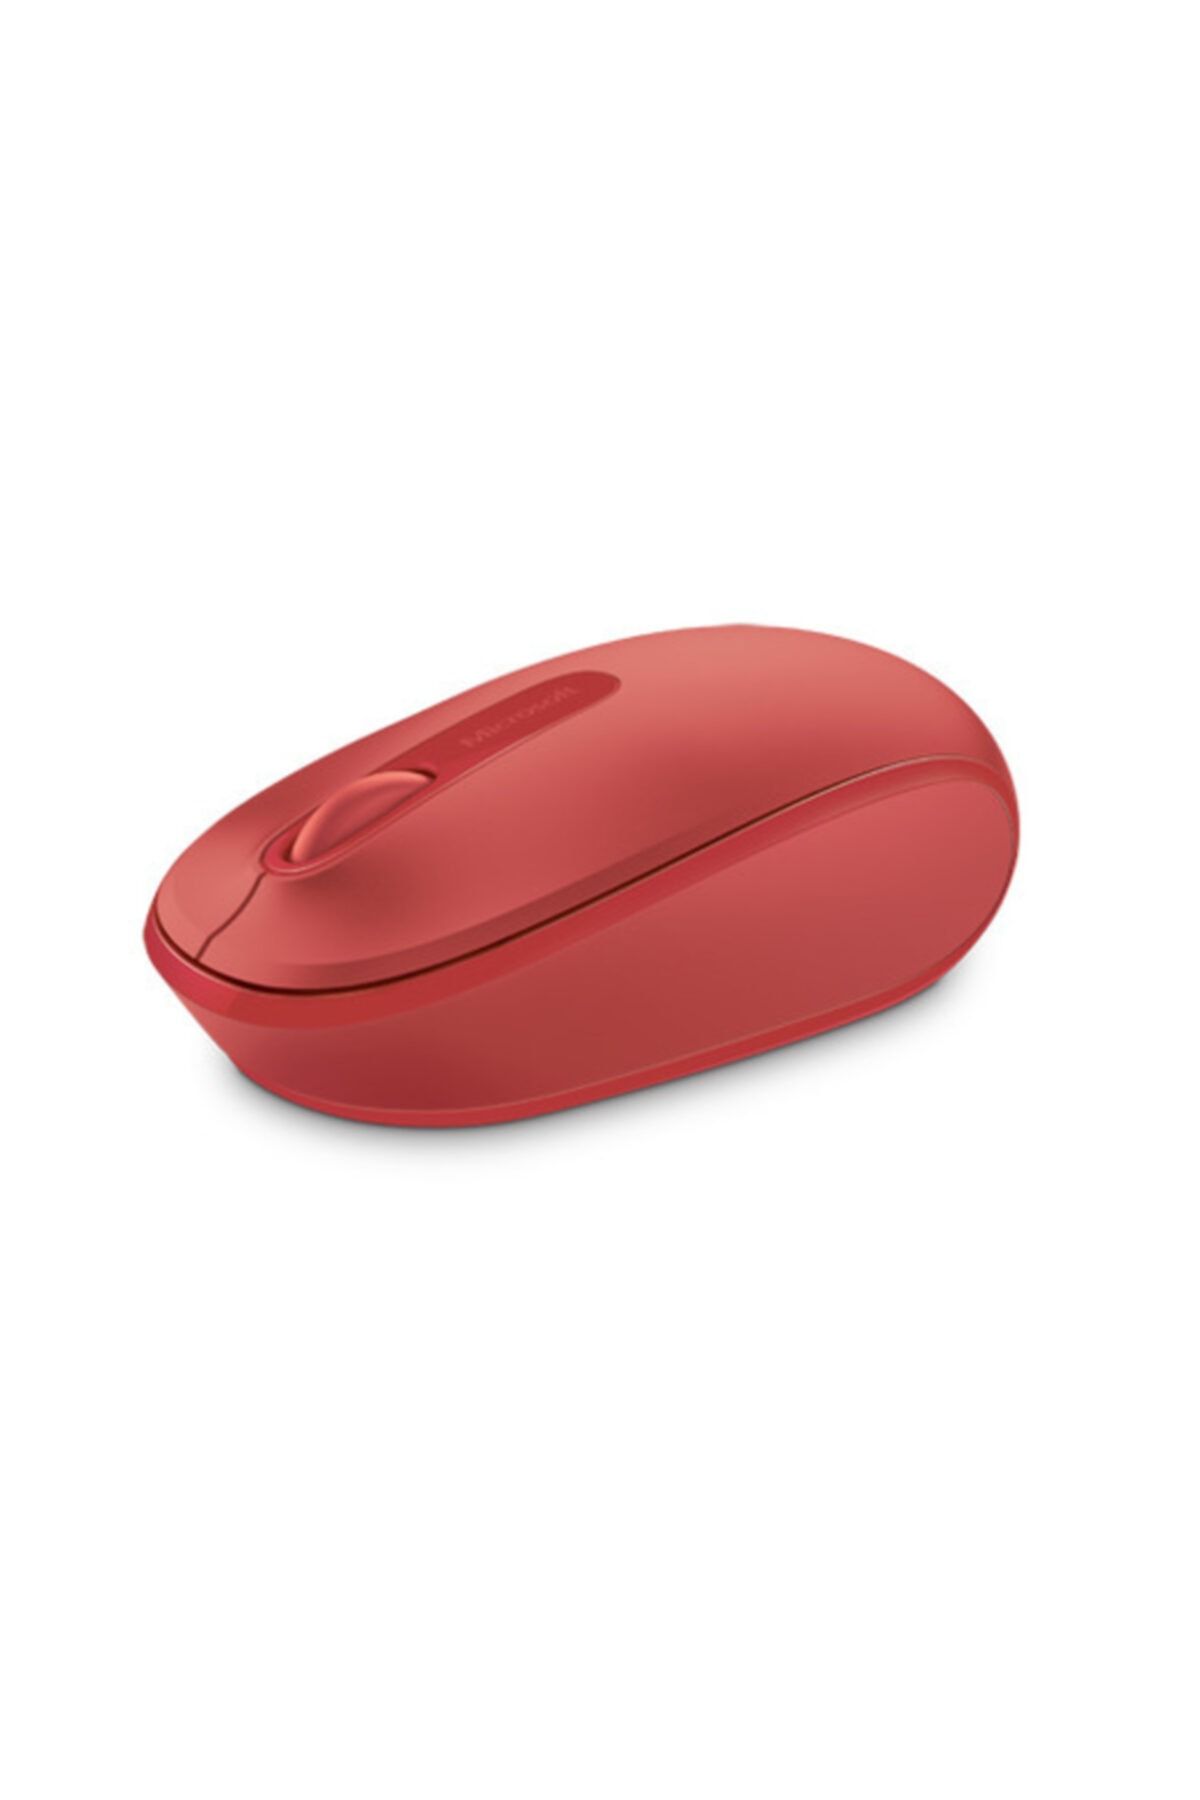 Microsoft Wireless Mbl Mouse 1850-red